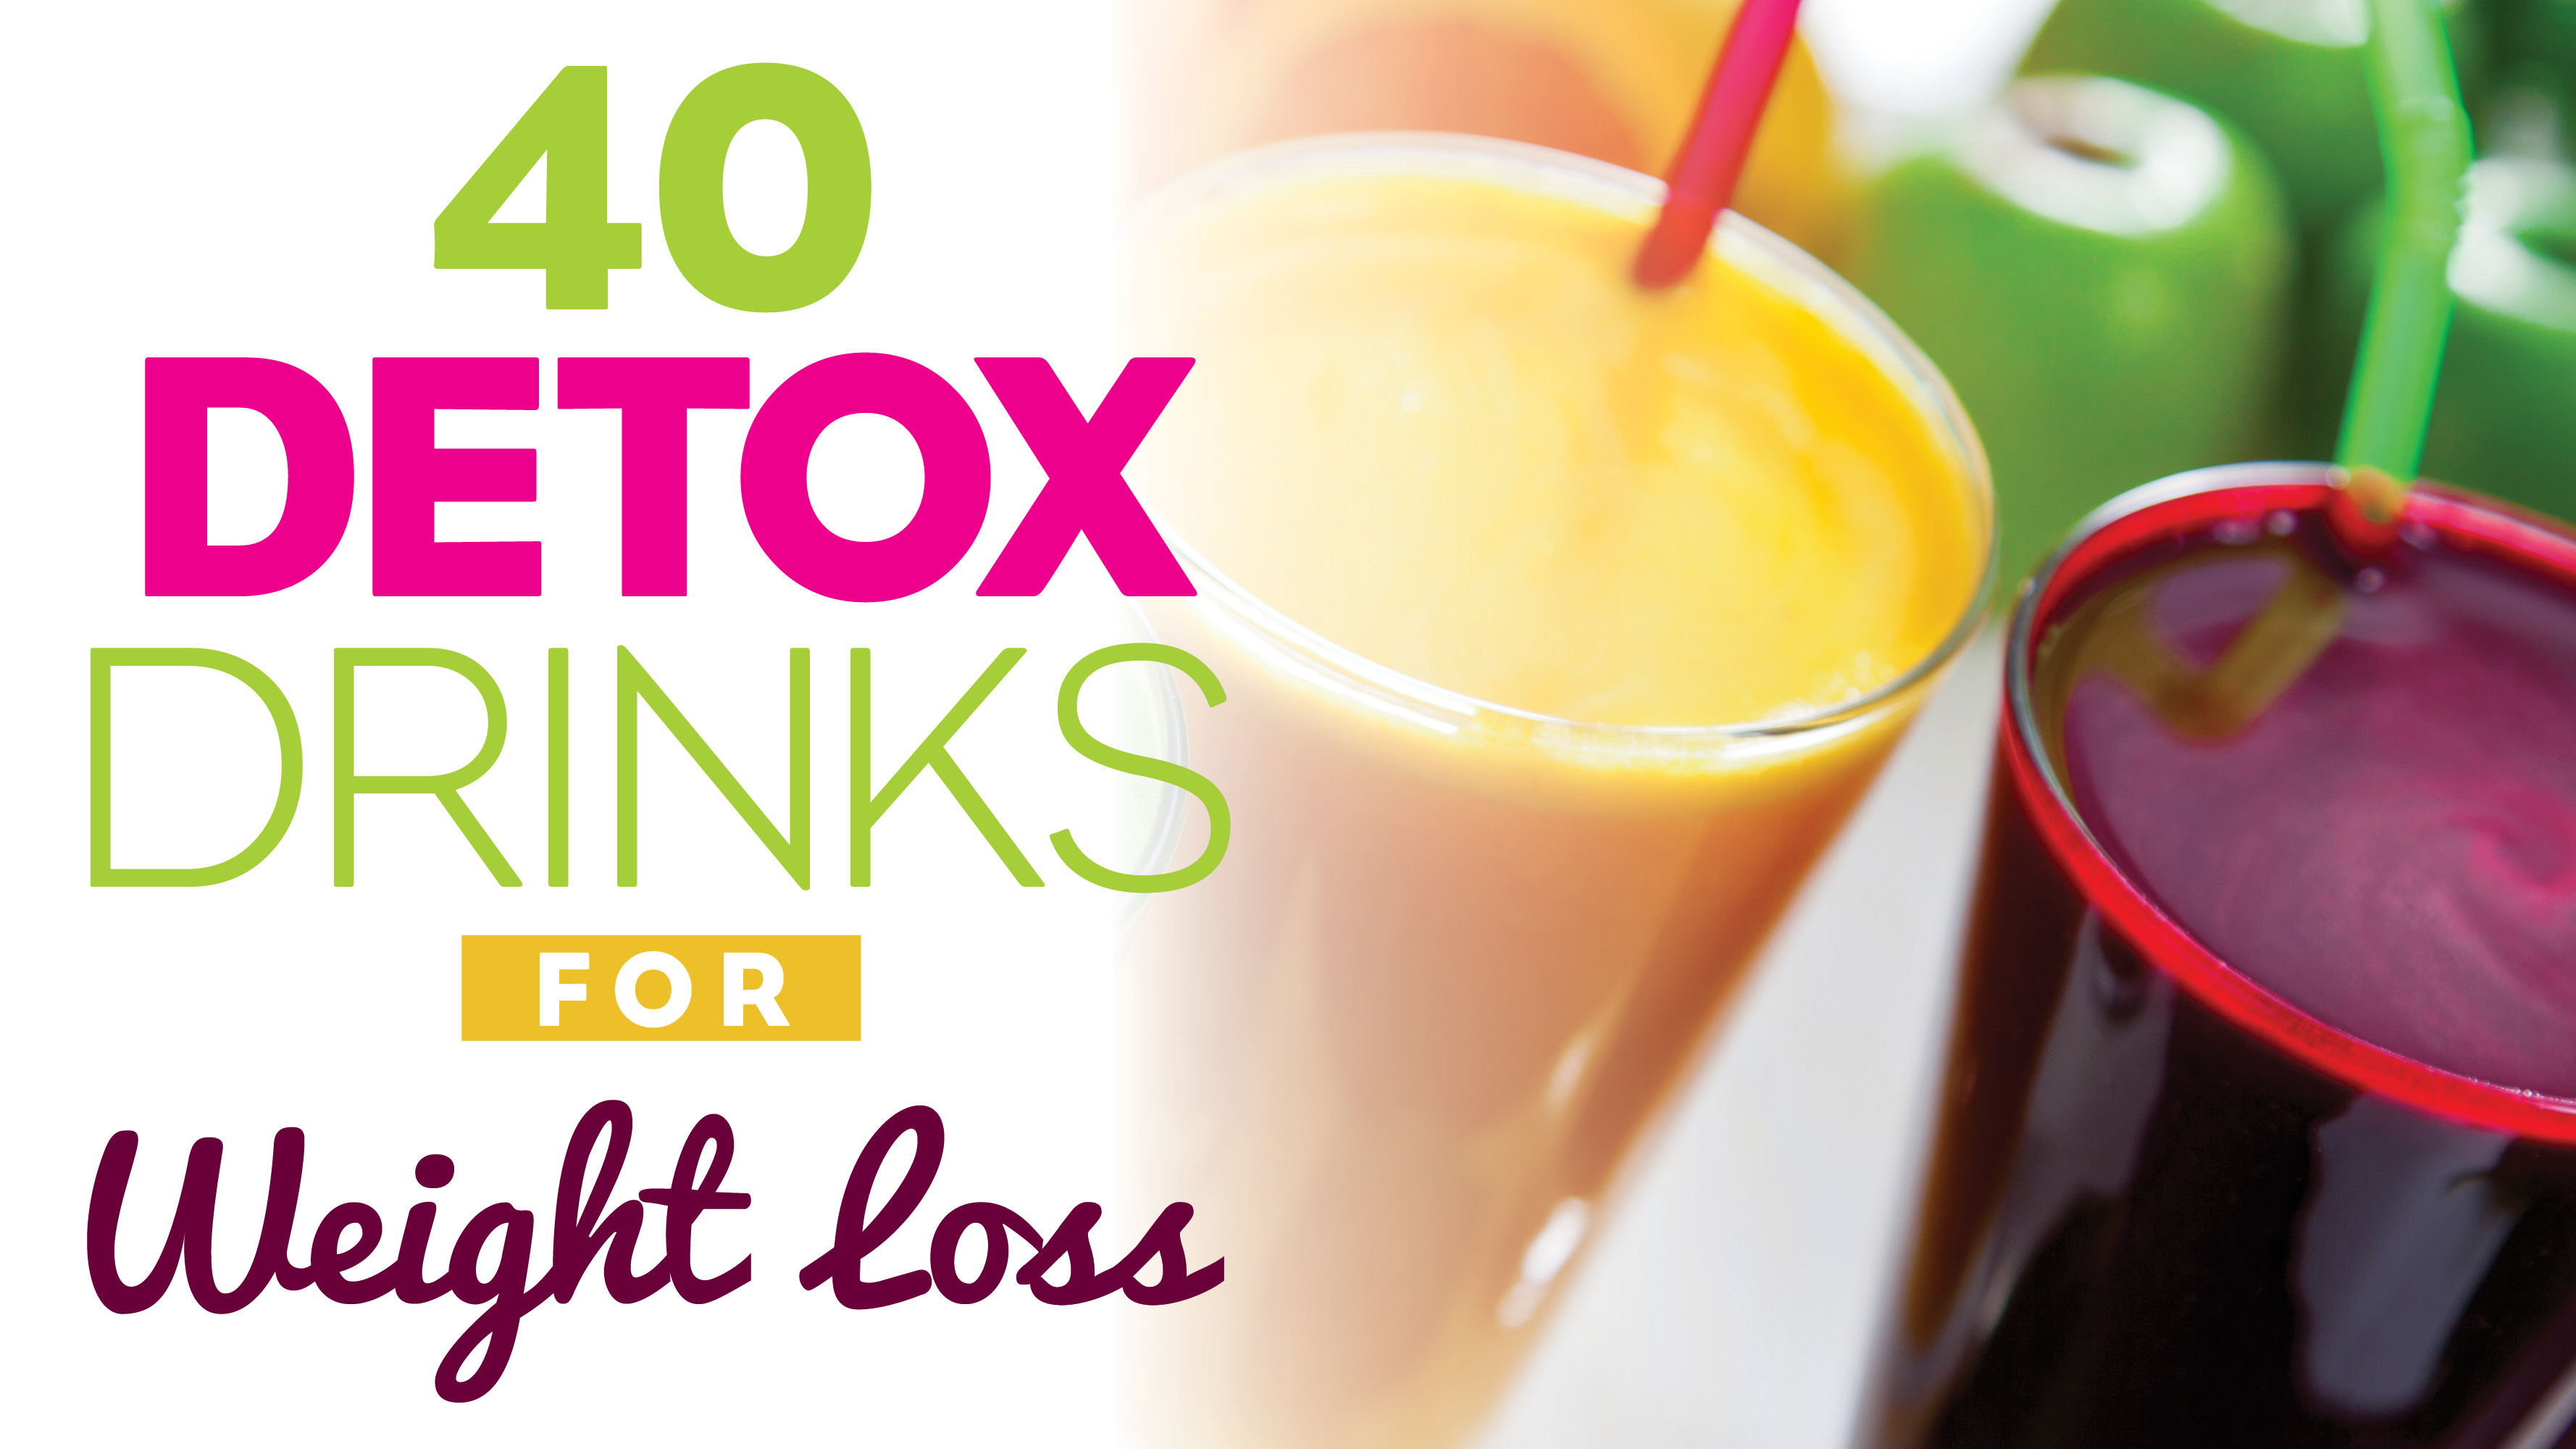 Weight Loss Detox Drinks Recipes
 40 Detox Drinks for Weight Loss